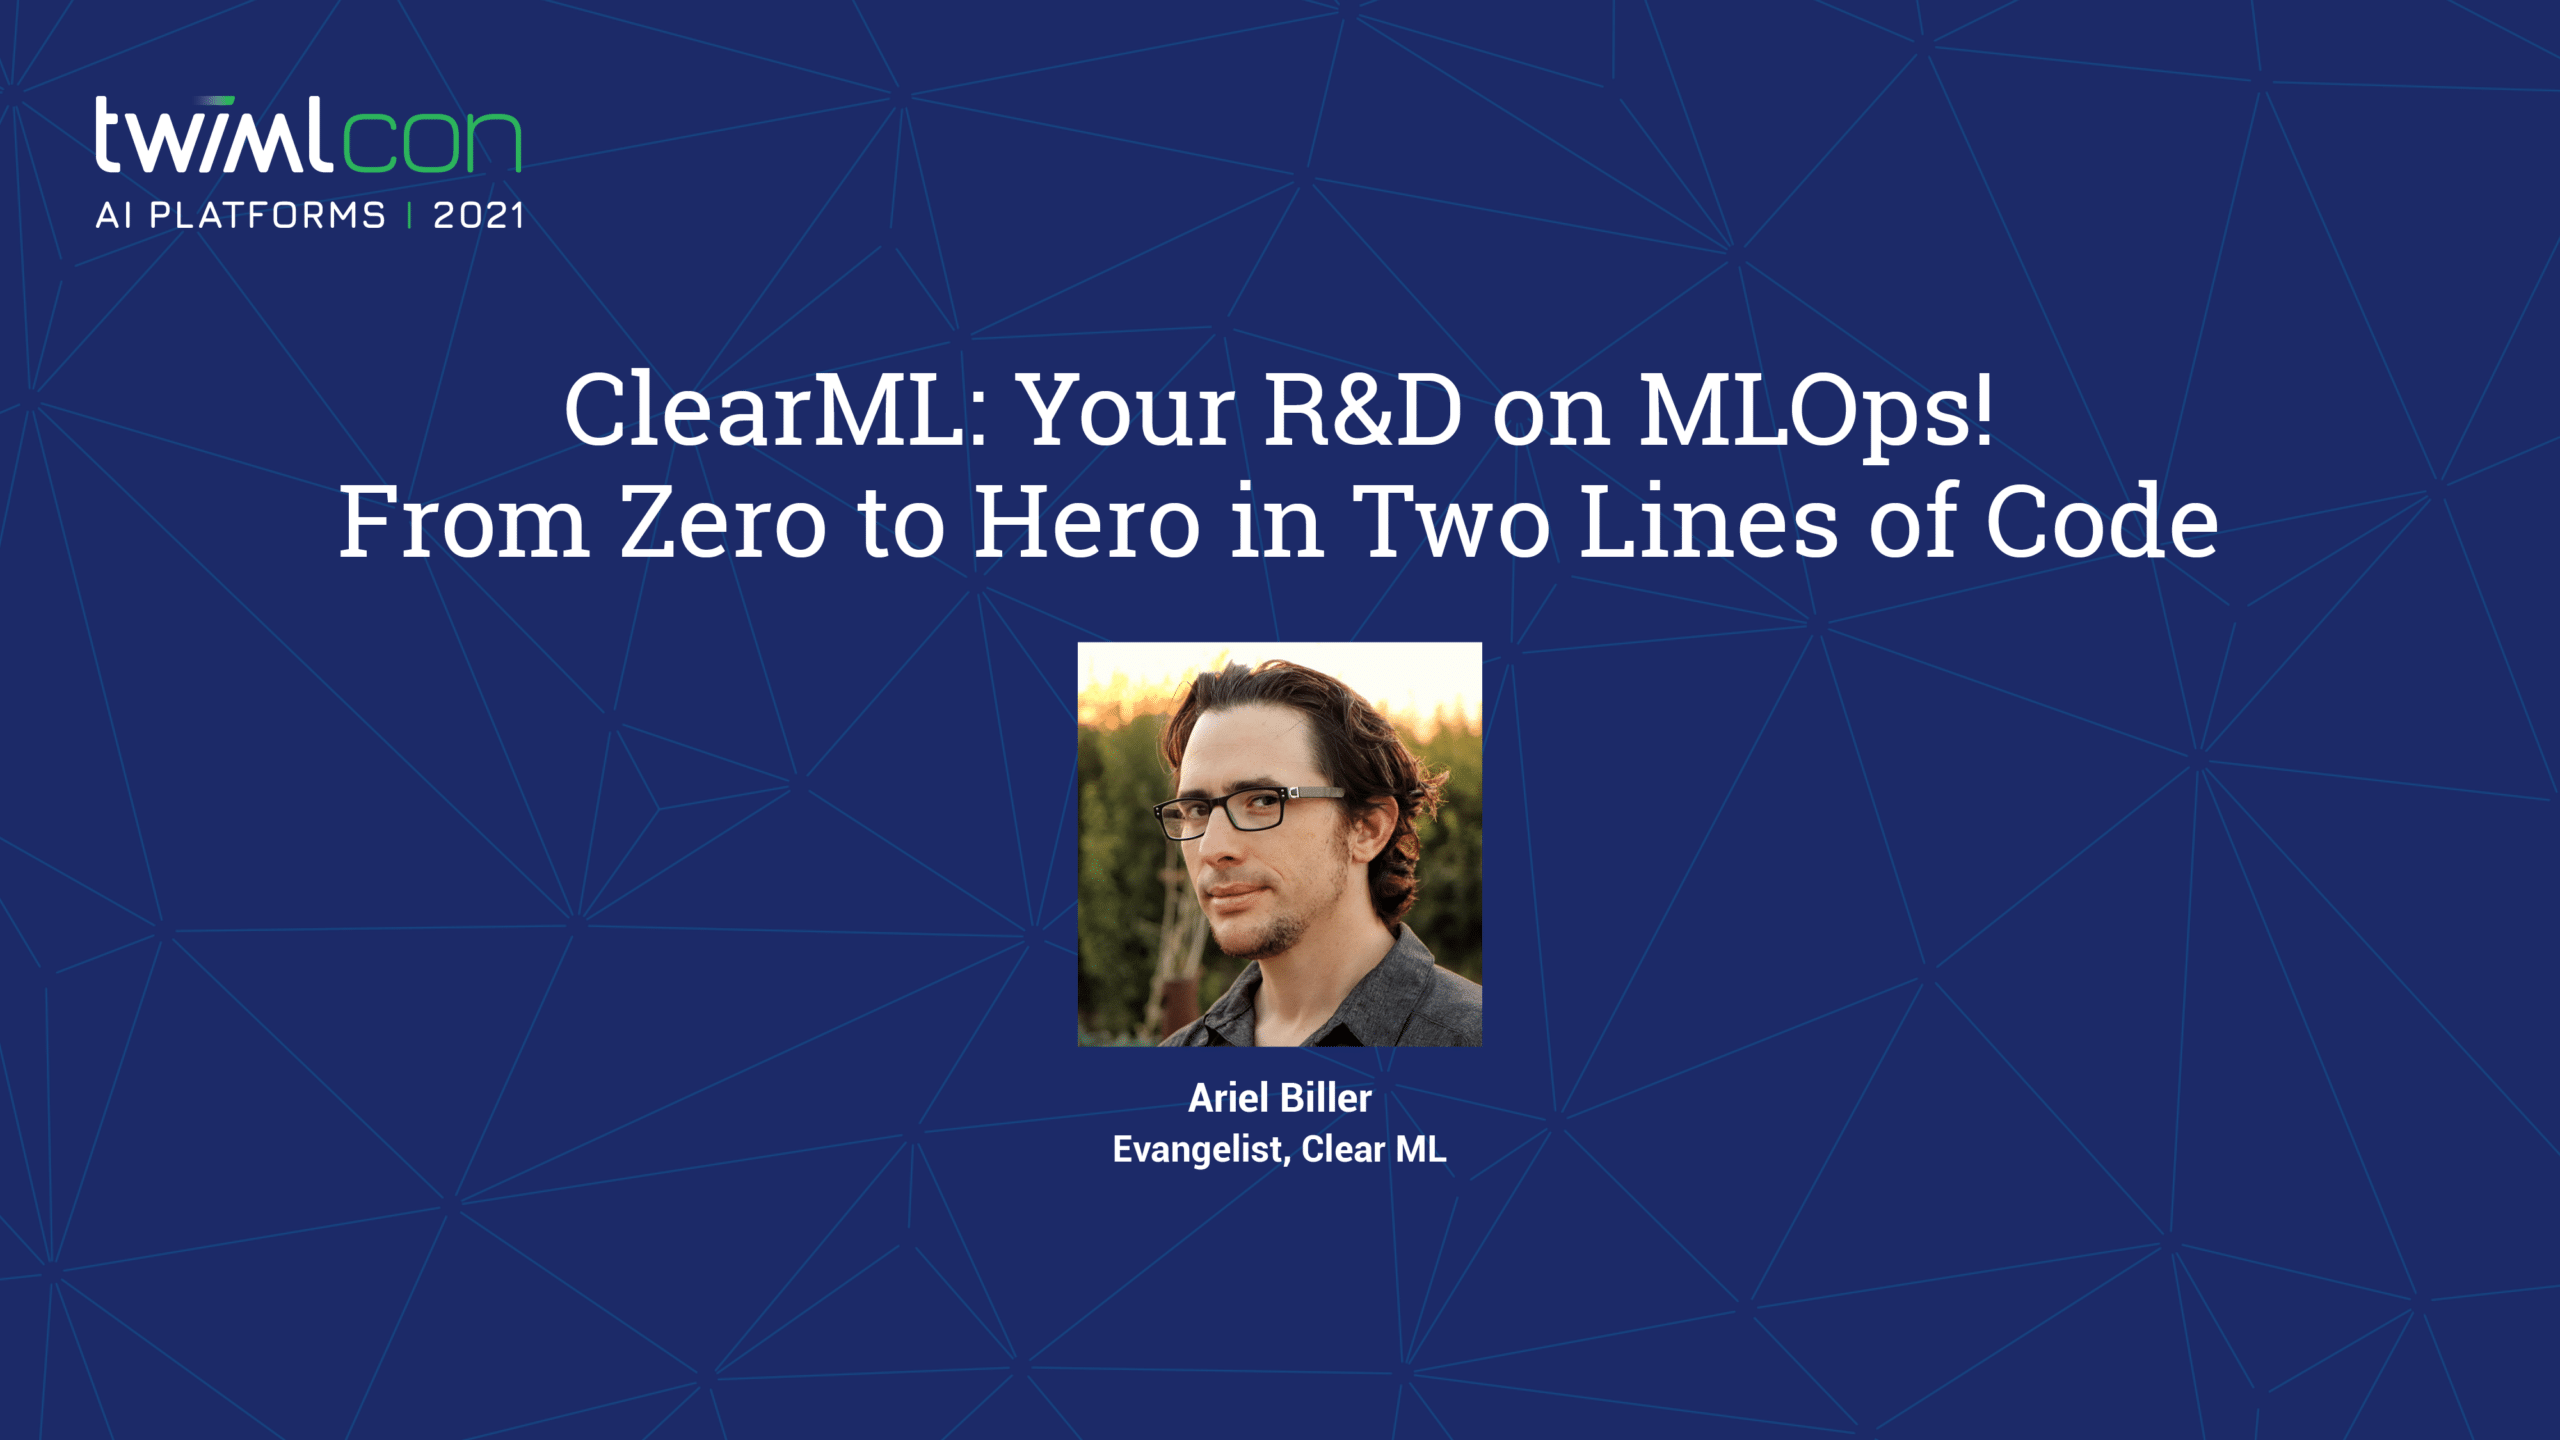 ClearML: Your R&D on MLOps! From zero to hero in two lines of code